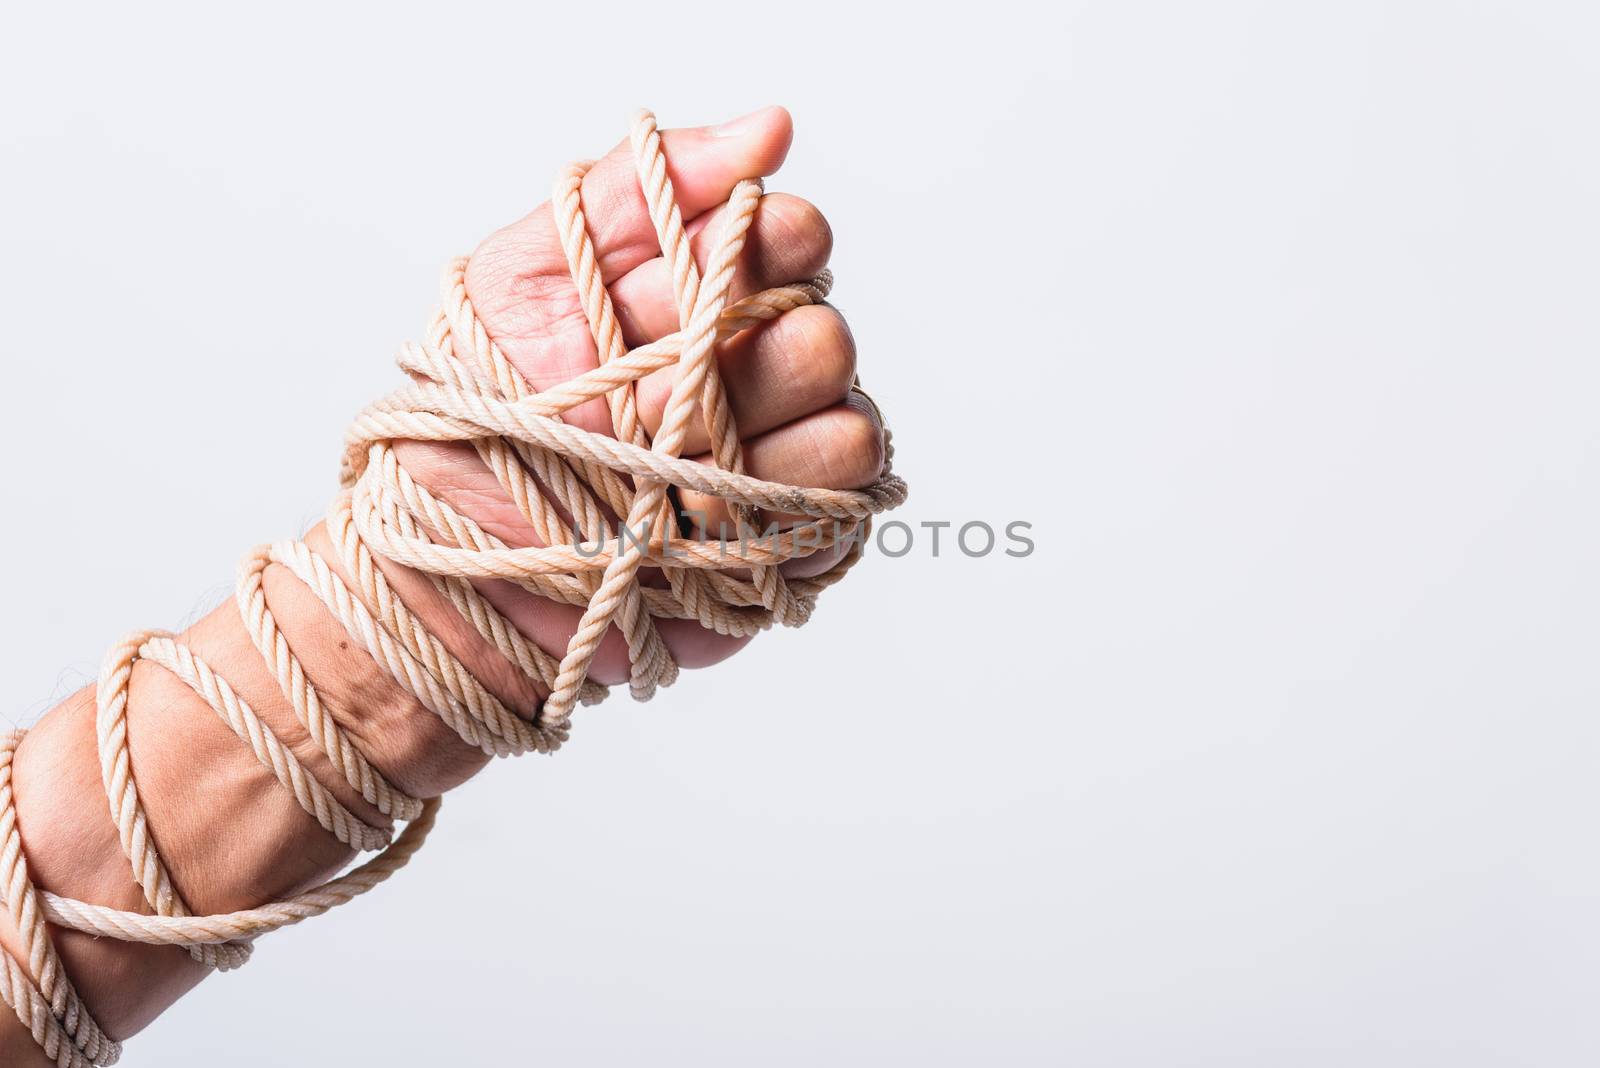 Rope on fist hand on white background, Human rights day concept by Sorapop